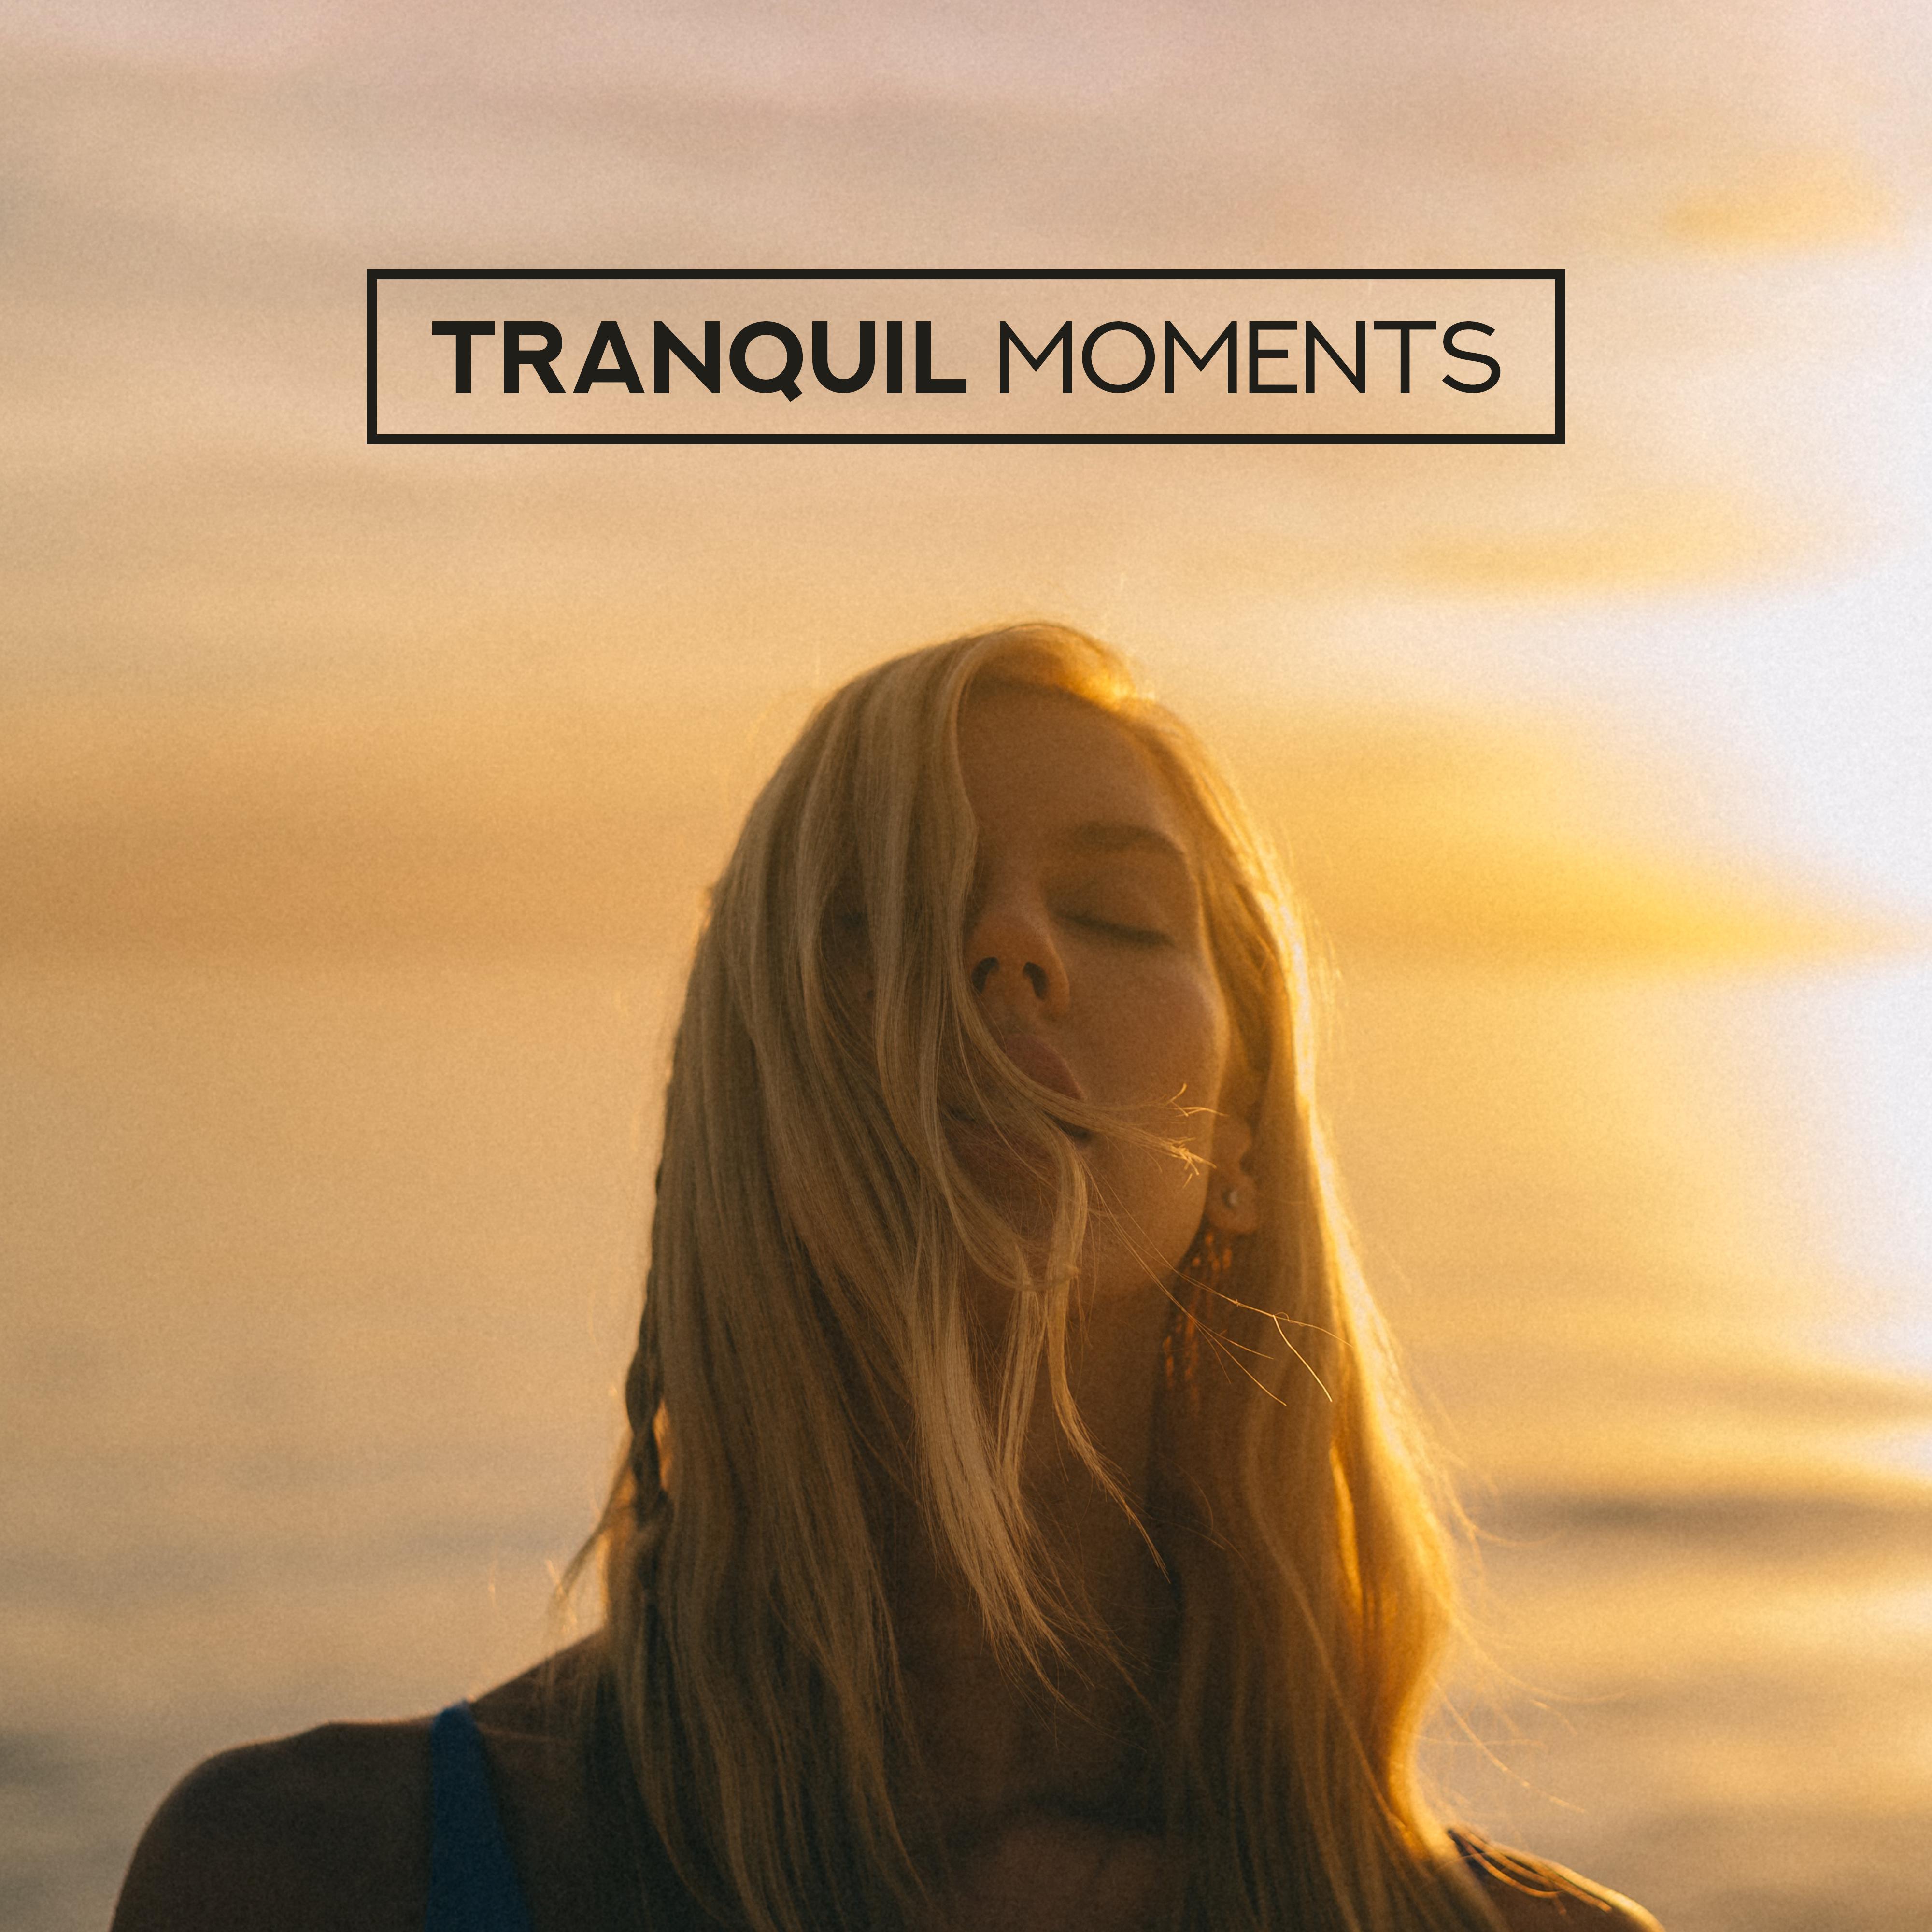 Tranquil Moments: Calm, Quiet and Peaceful Melodies that' ll bring You into a Blissful State of Peace and Balance, Free from Stress, Tension, Anger, Negative Emotions and Unnecessary Thoughts